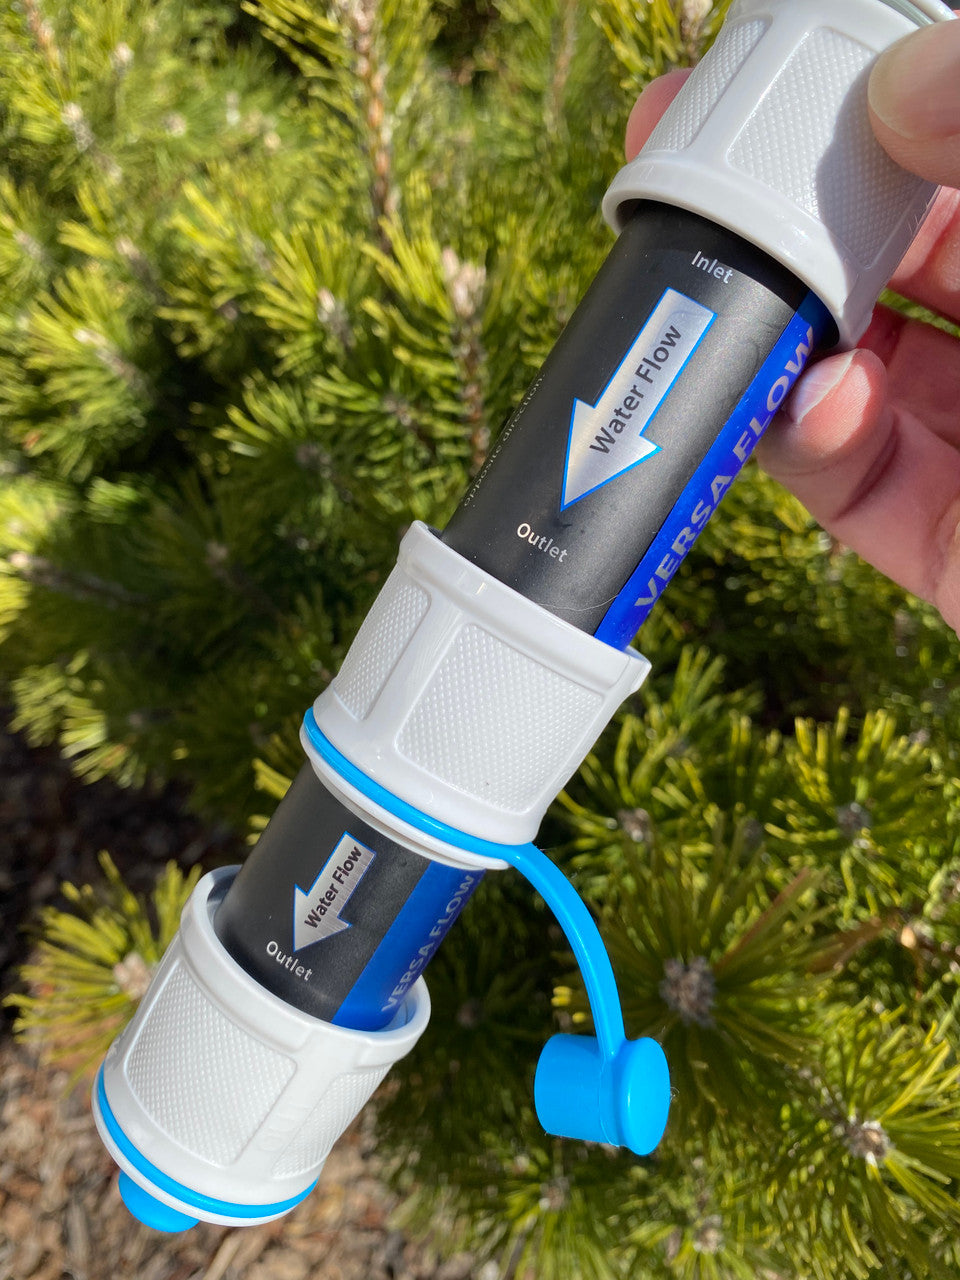 HydroBlu - Activated Carbon Filter for Versa Flow